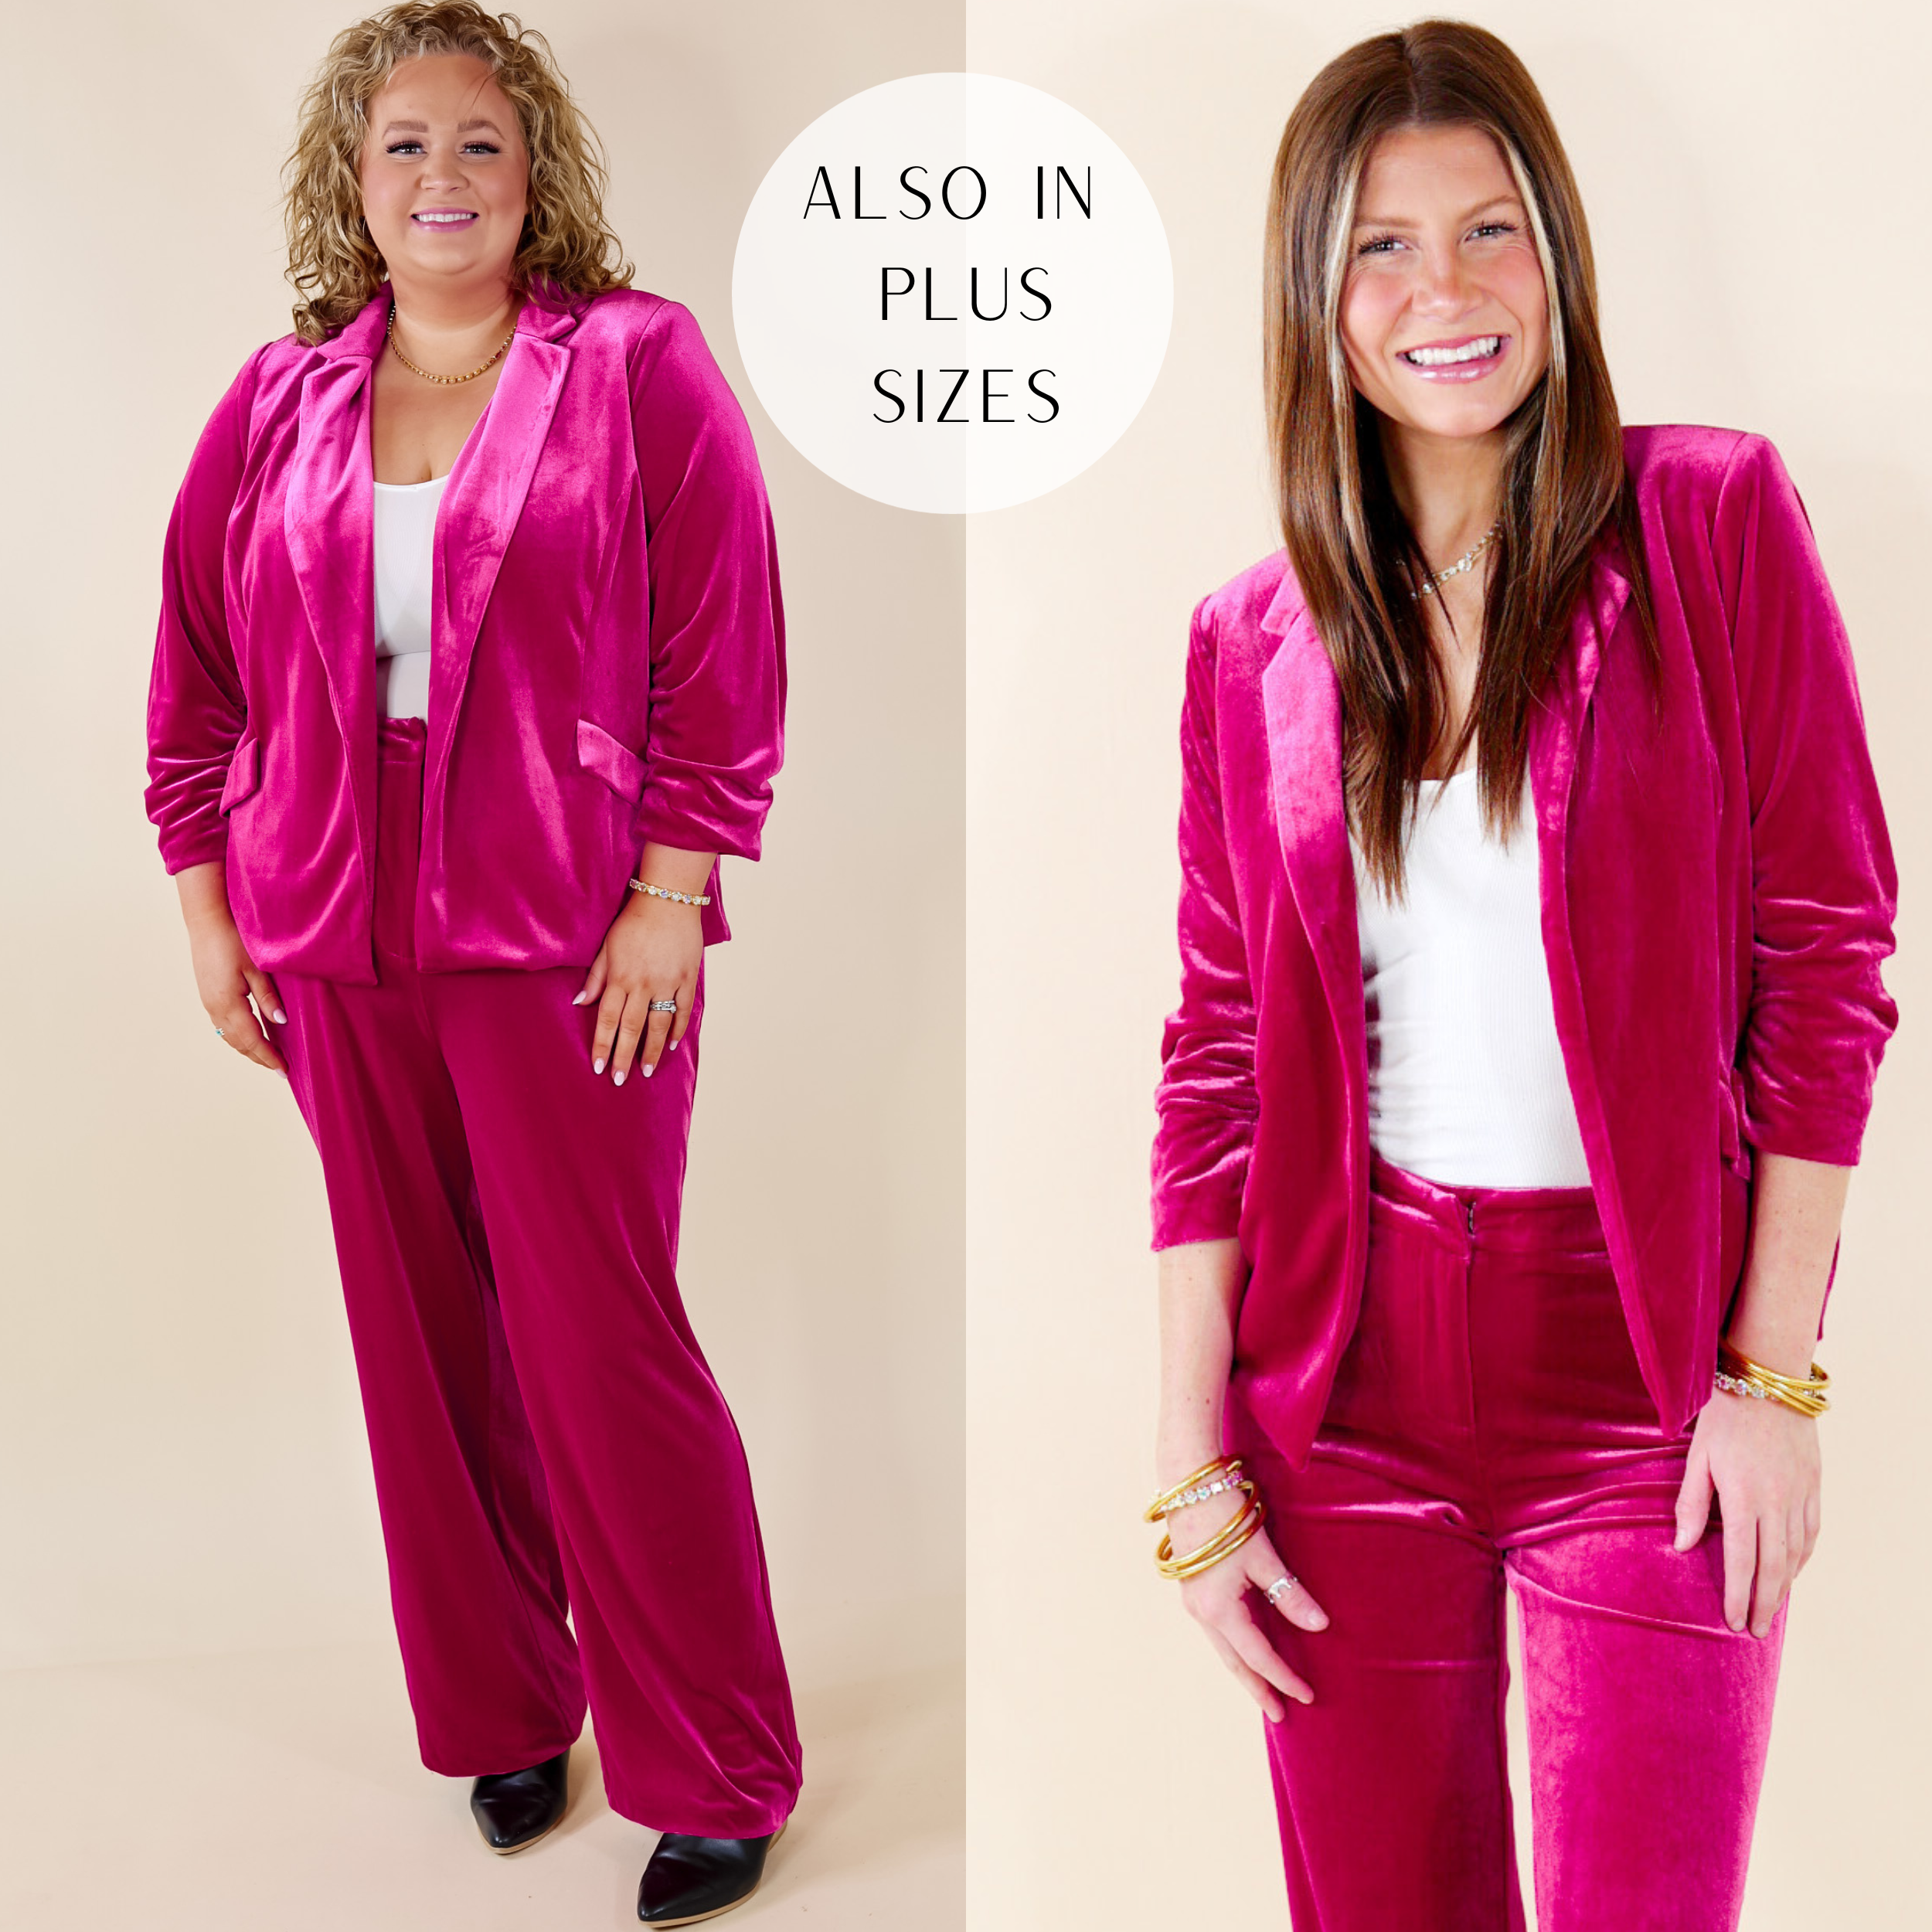 Model's are wearing pink velvet blazers. THe plus size model on the left paired the outfit with silver jewelry and black booties. Regular model paired the outfit with gold jewelry.